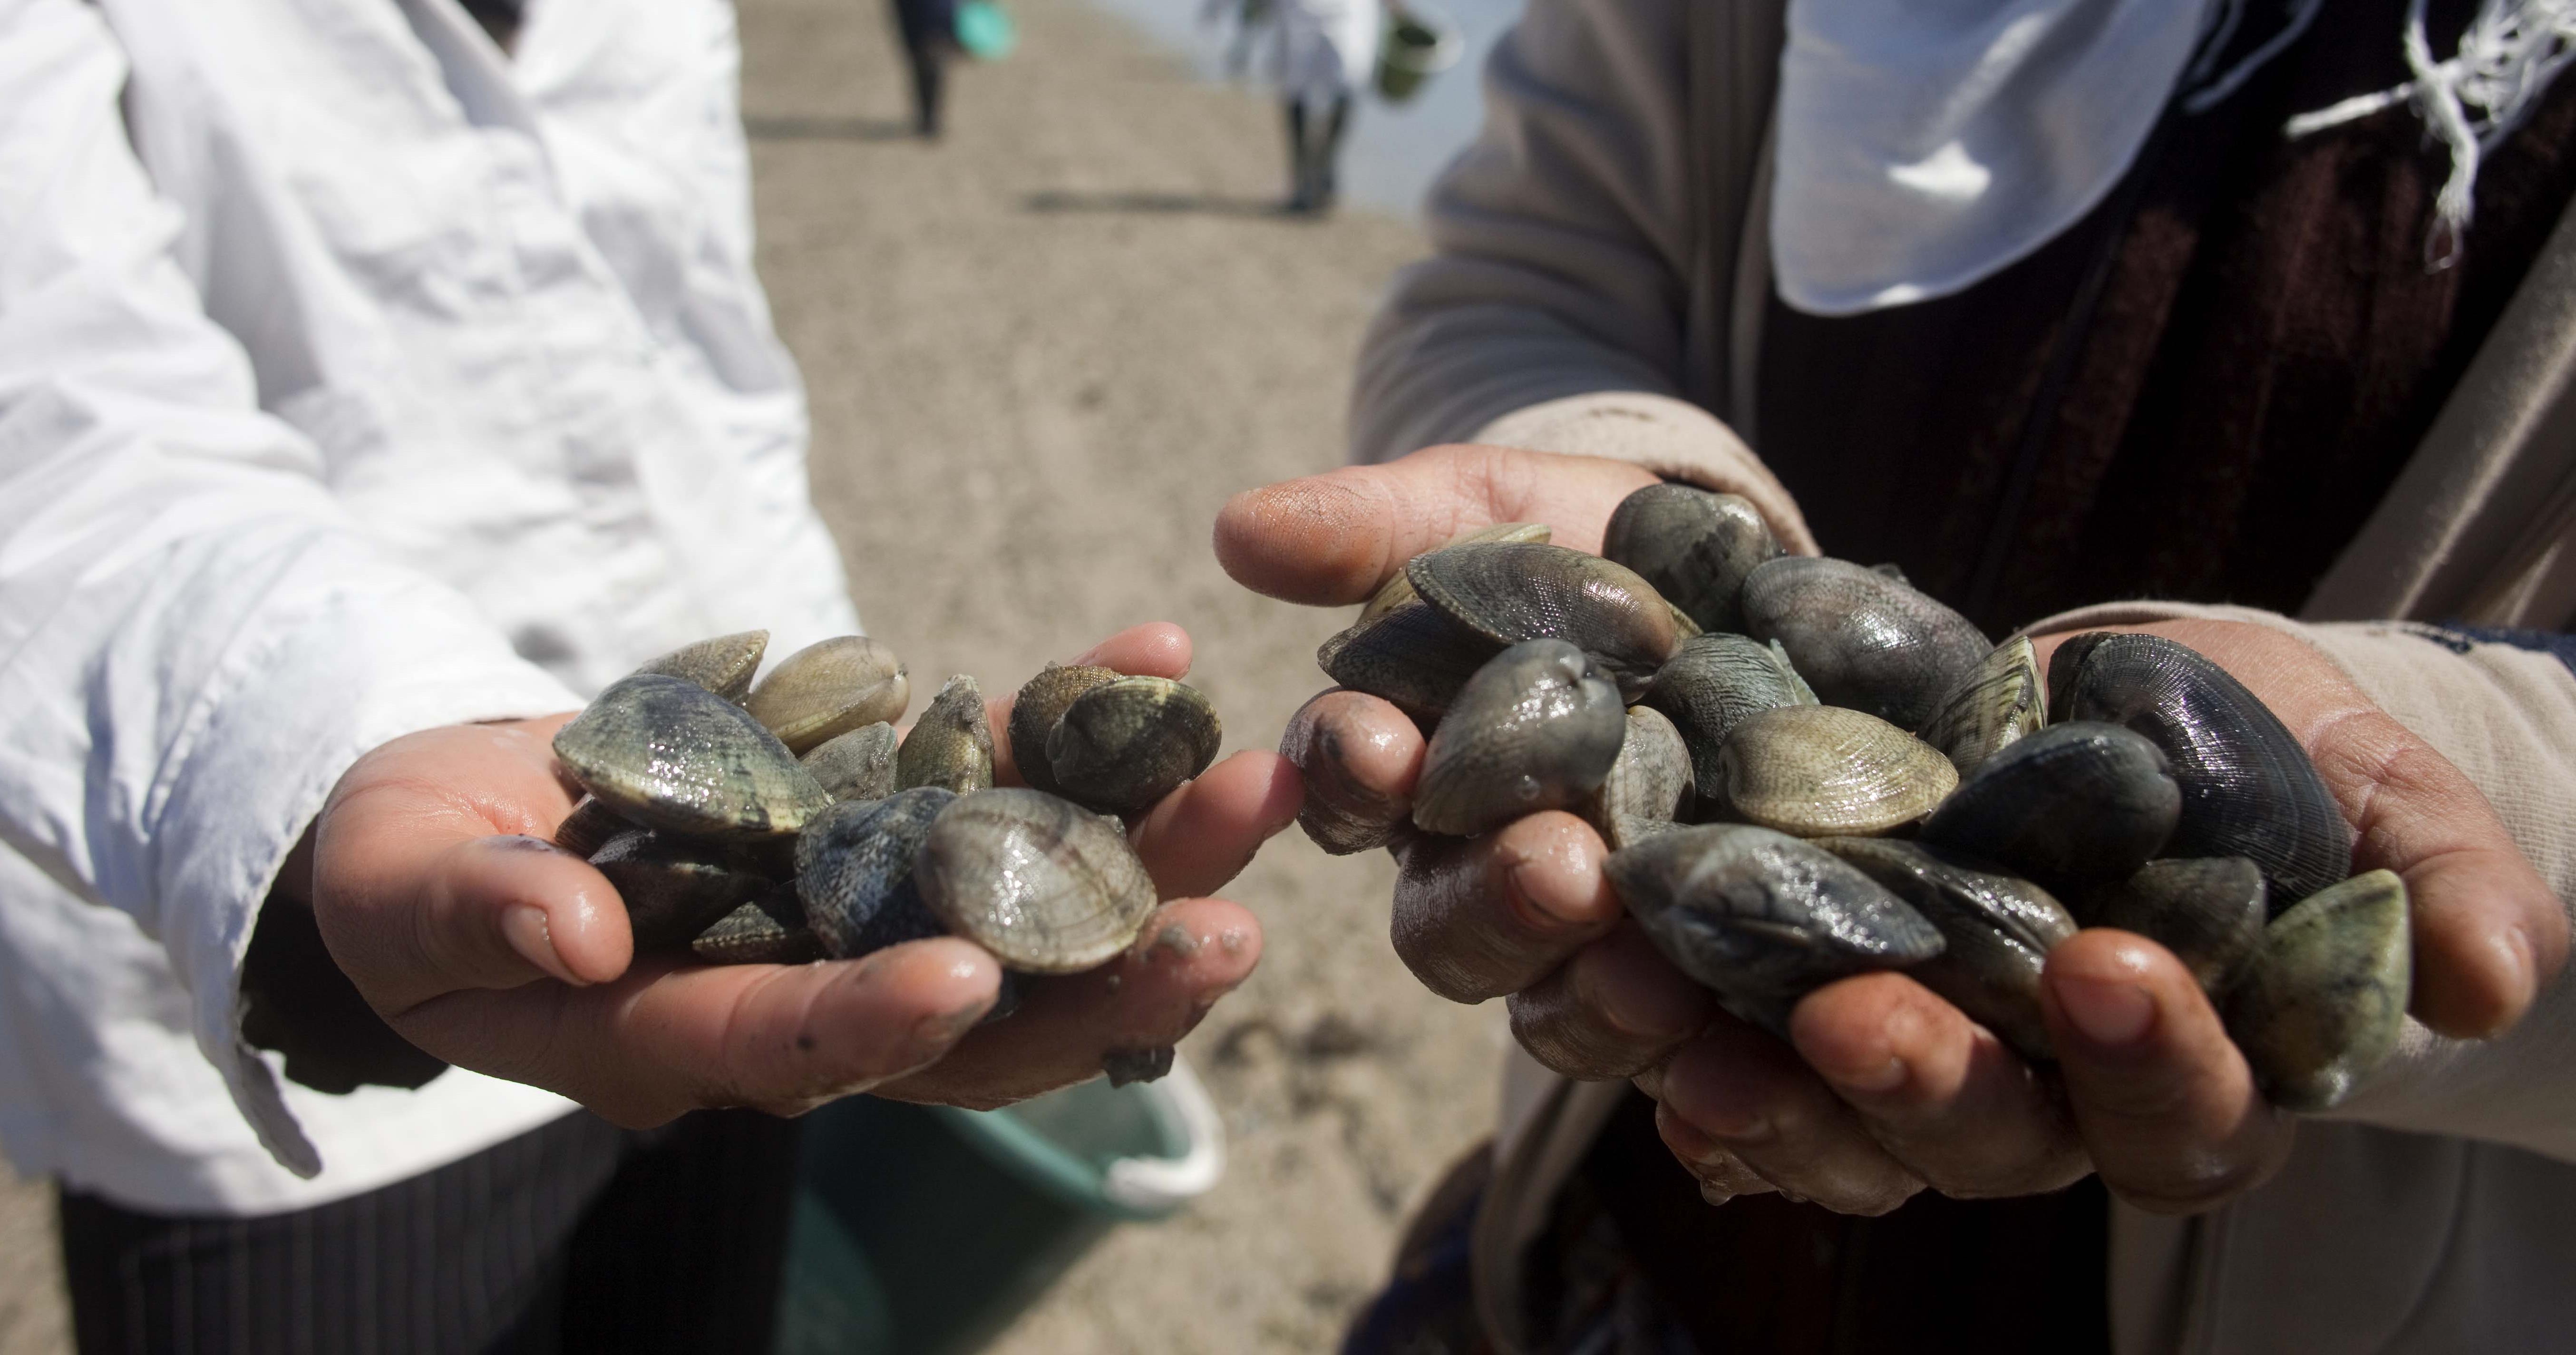 Production for bivalves lower in 2016